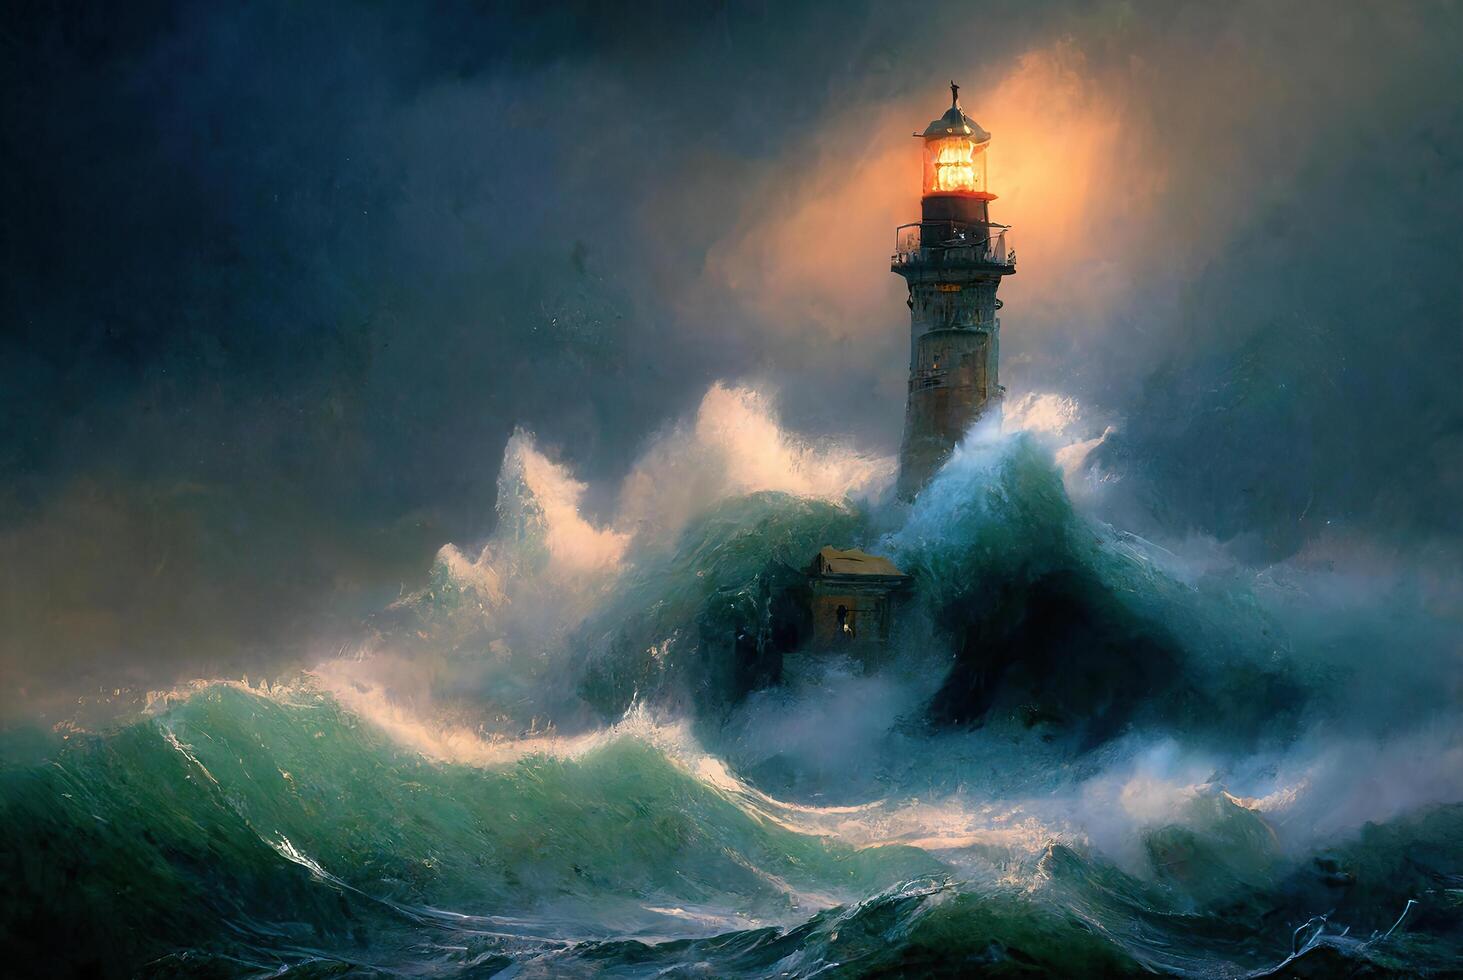 Lighthouse during storm at sea, oil or watercolor painting. photo